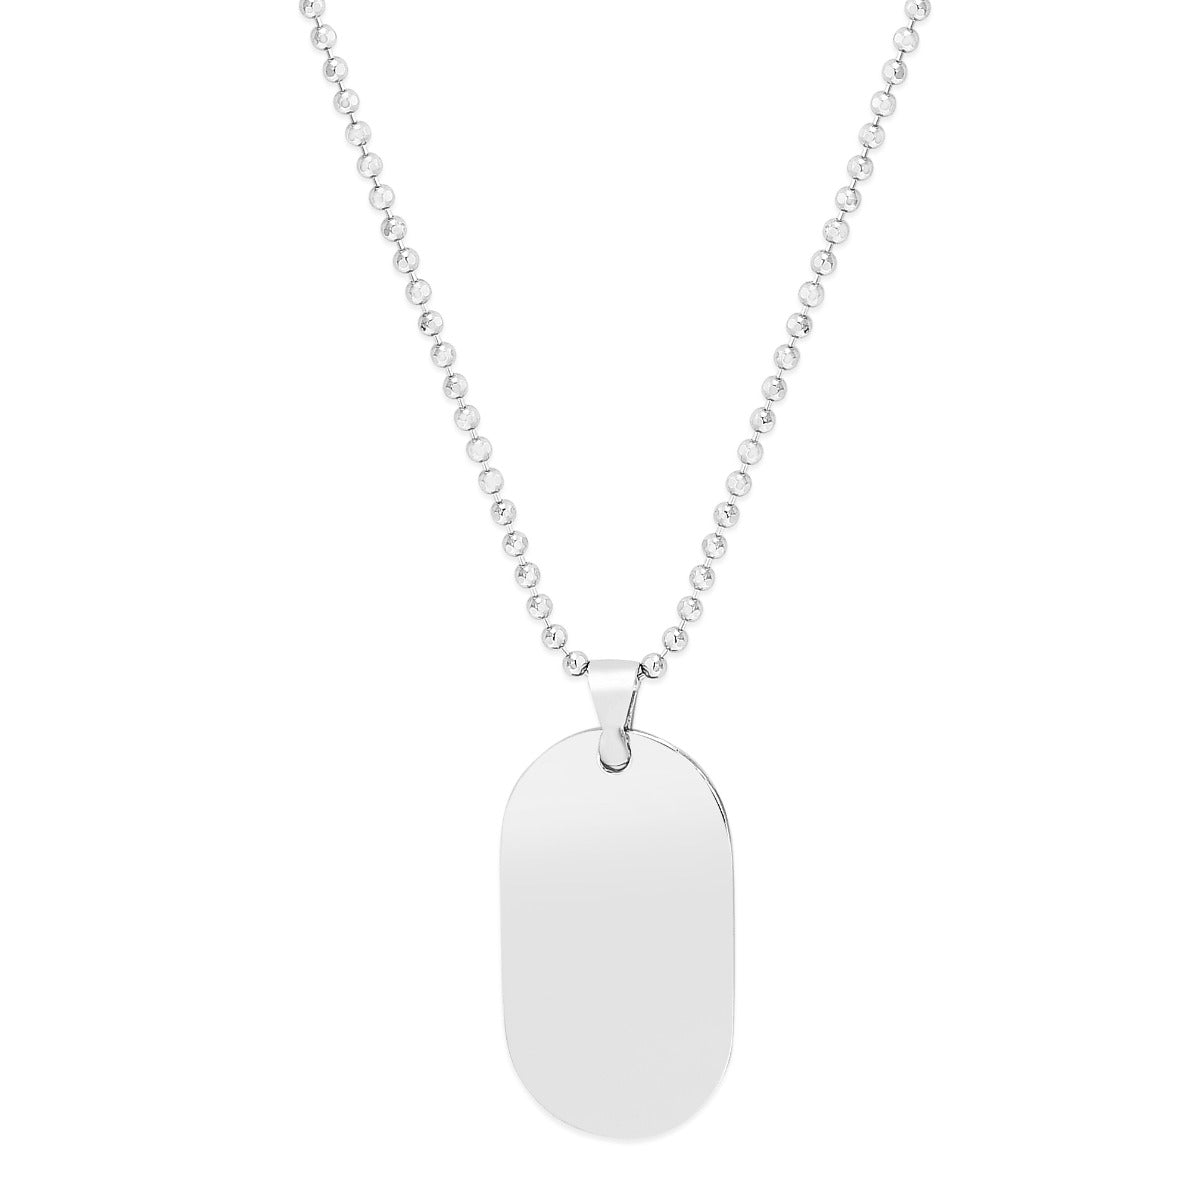 Sterling Silver Polished Oval Tag Necklace with Lobster Clasp